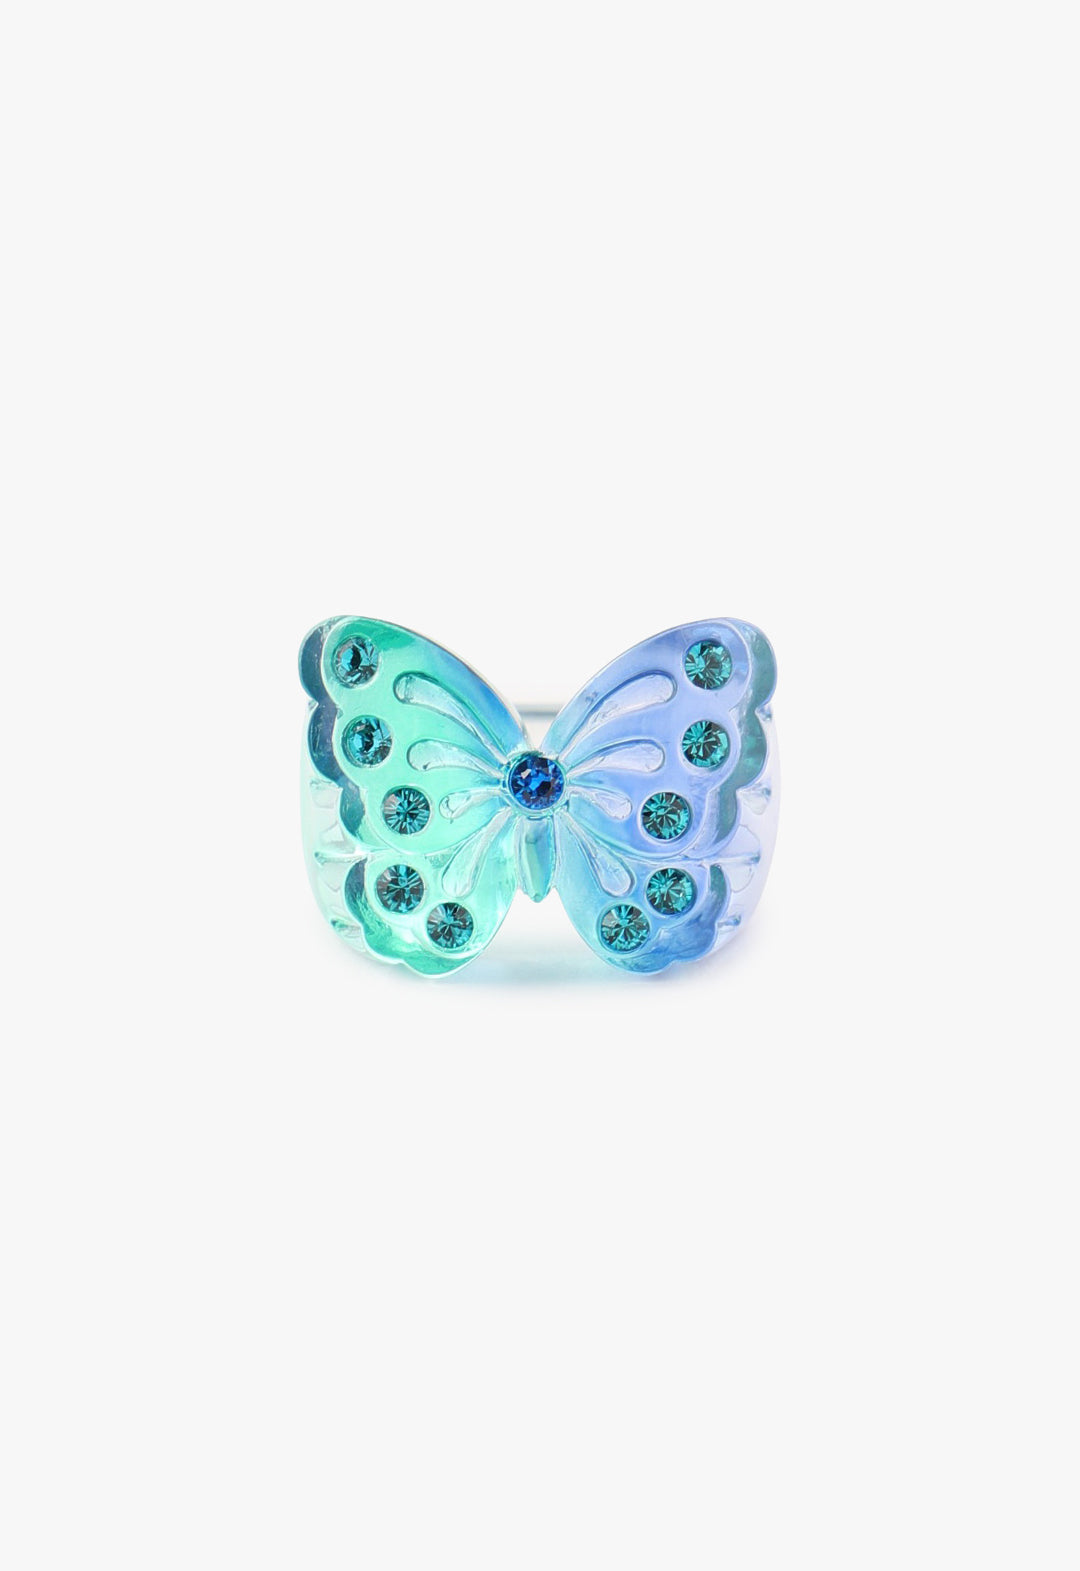 Butterfly Ring Green 5-gemstones diamond like on each wing and blue as a head